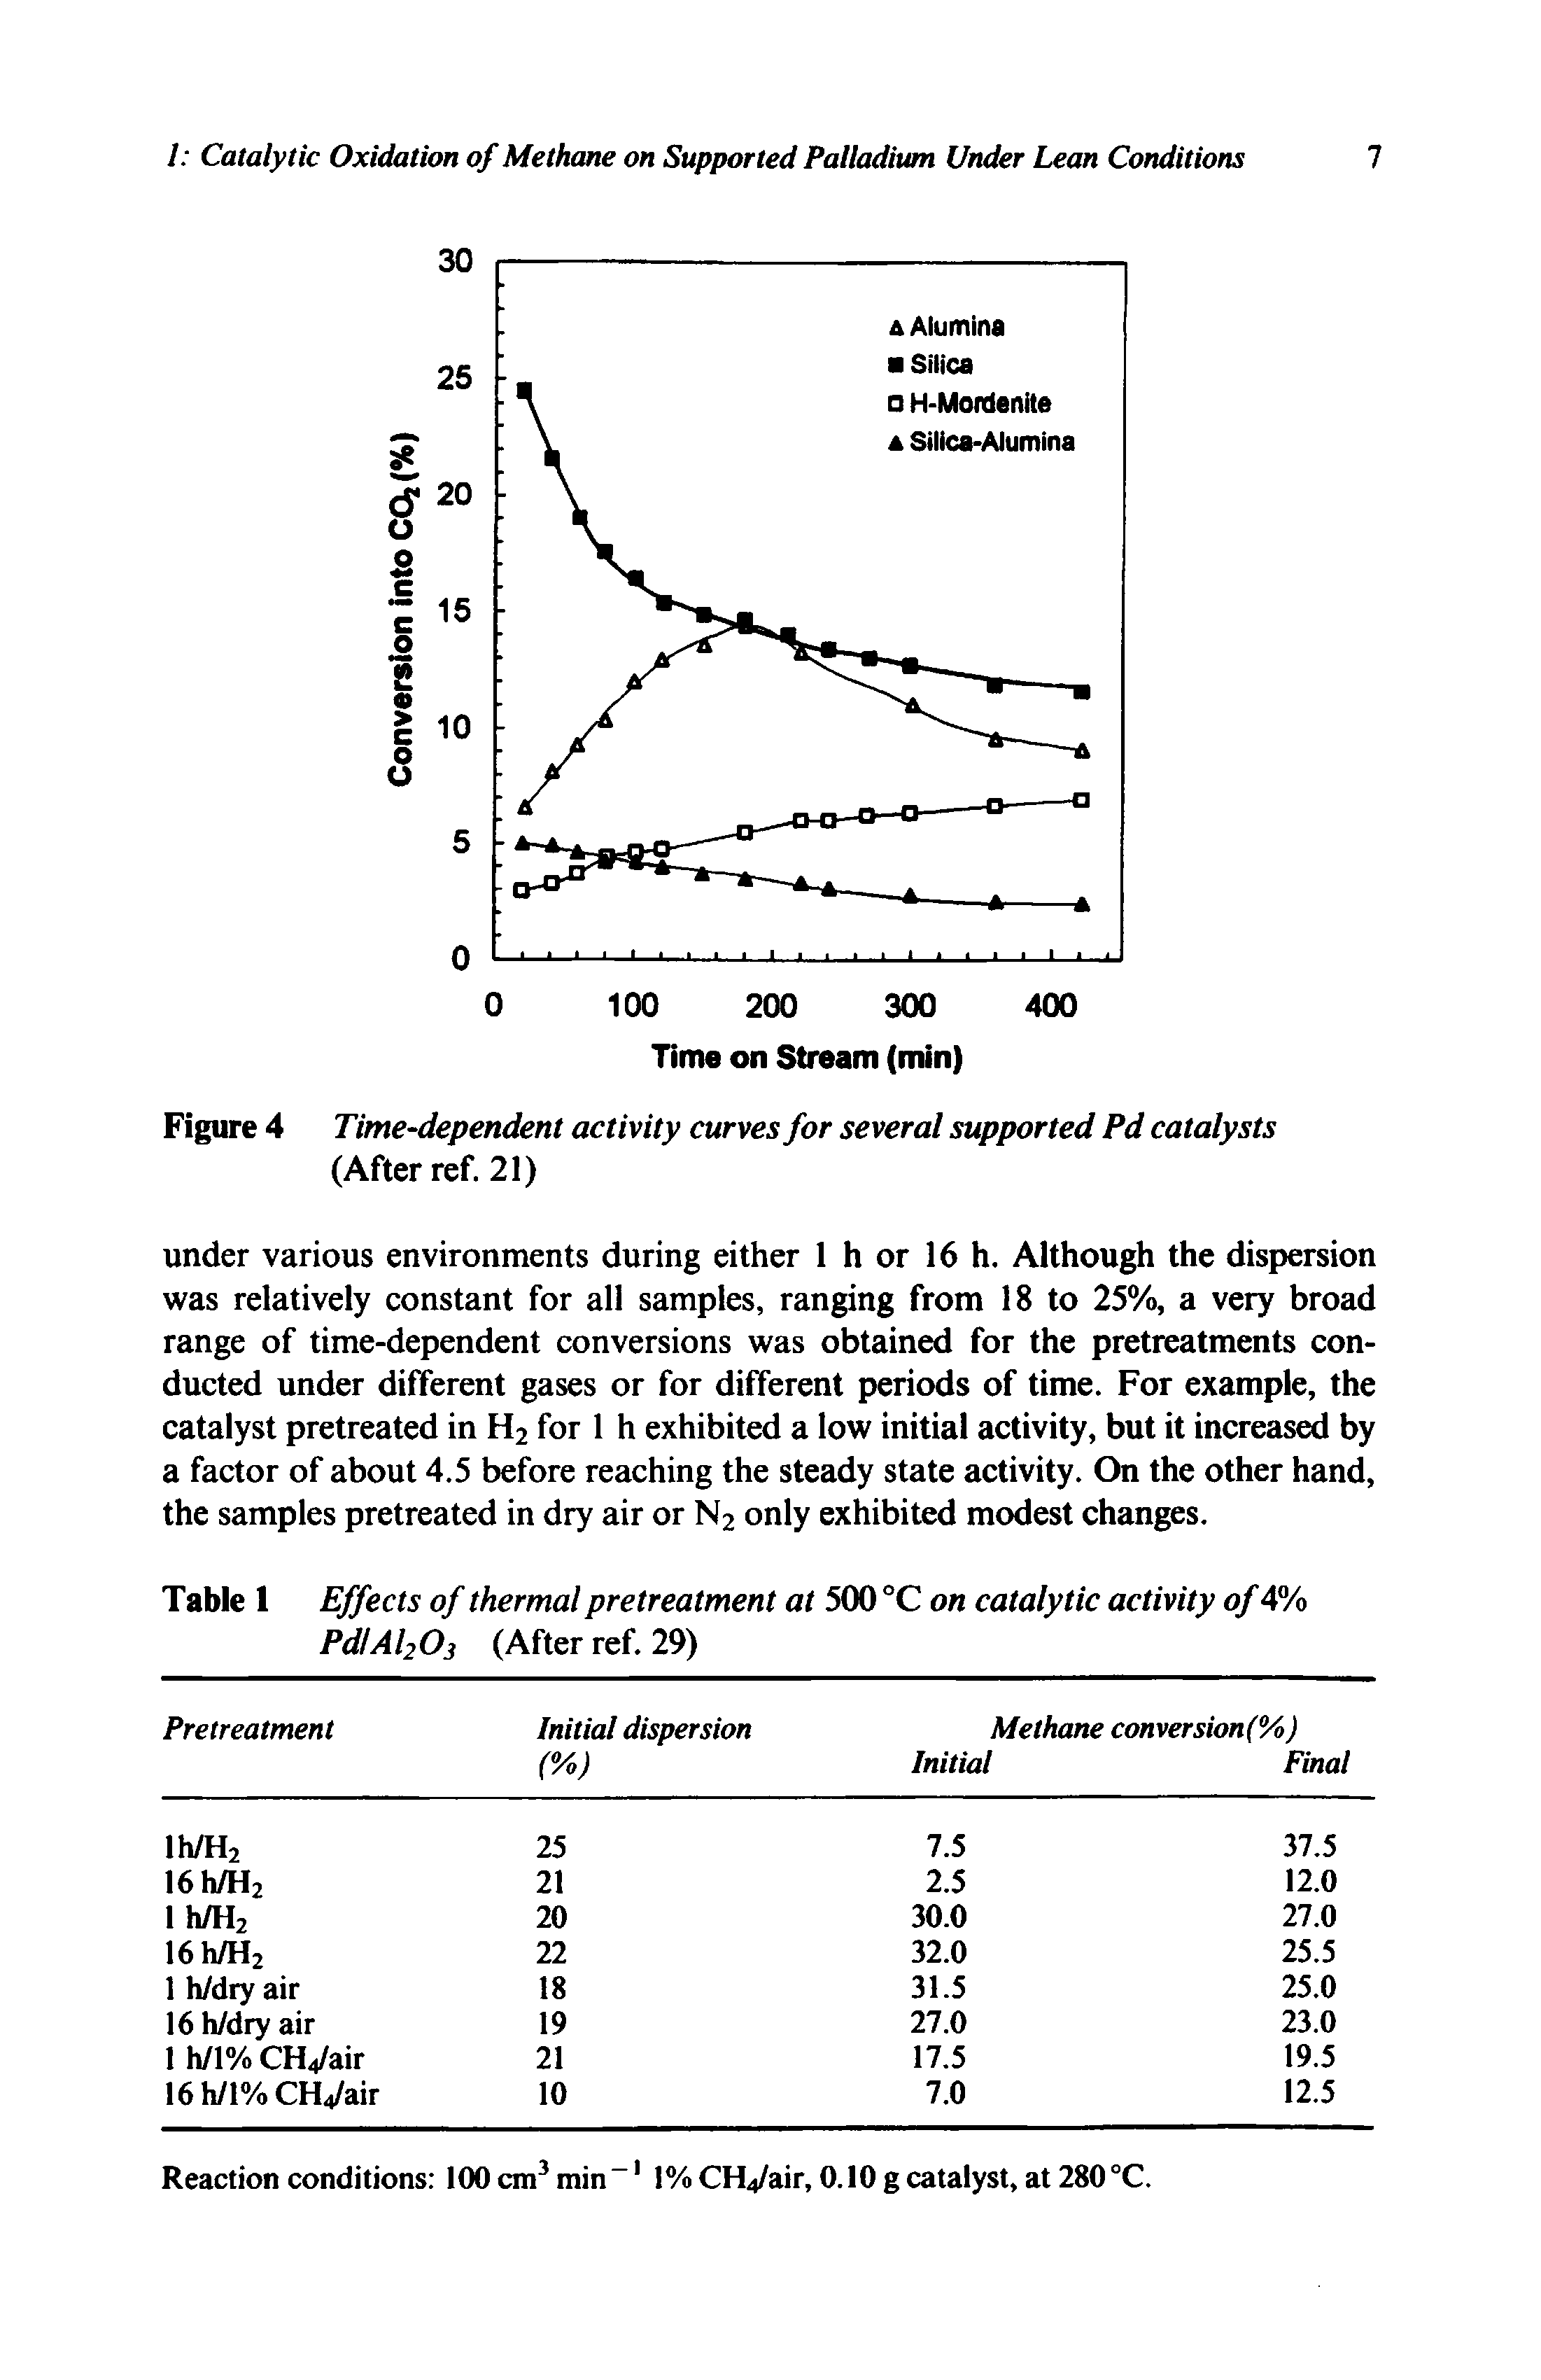 Table 1 Effects of thermal pretreatment at 500 °C on catalytic activity of 4%...